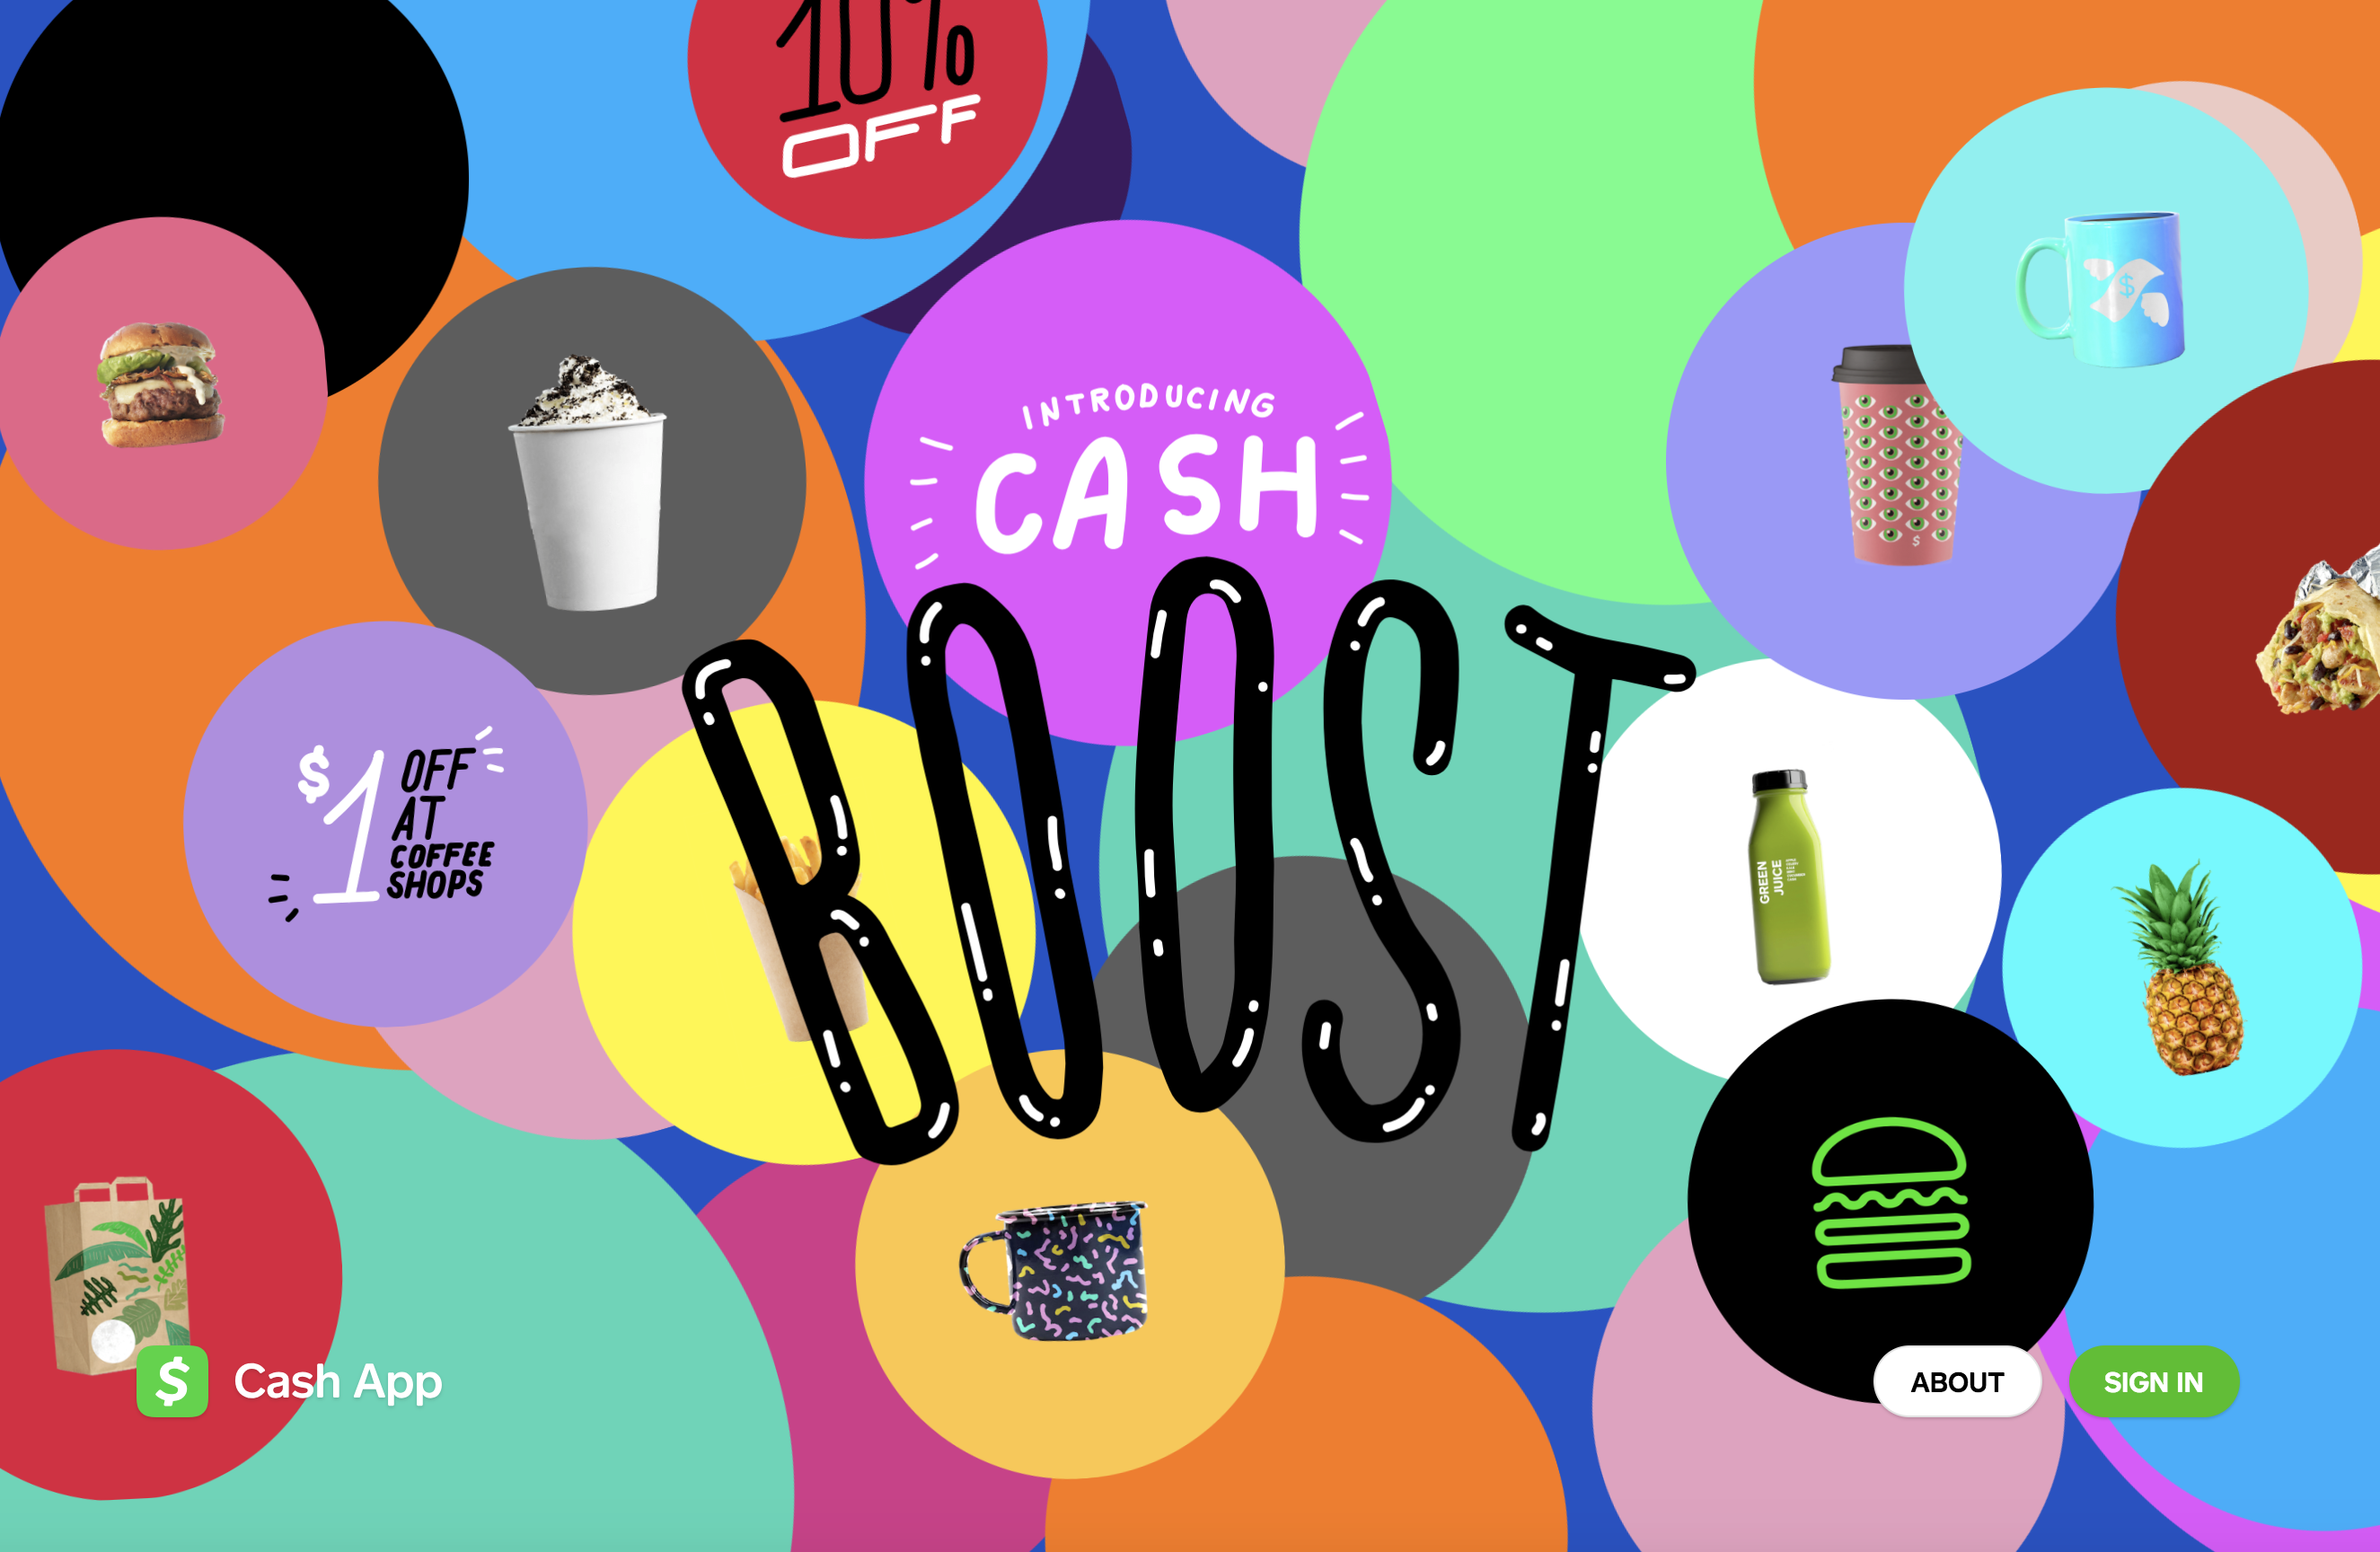 Square's Cash Boost rewards program offer new ways to save at Chipotle, Shake Shack and other chains.